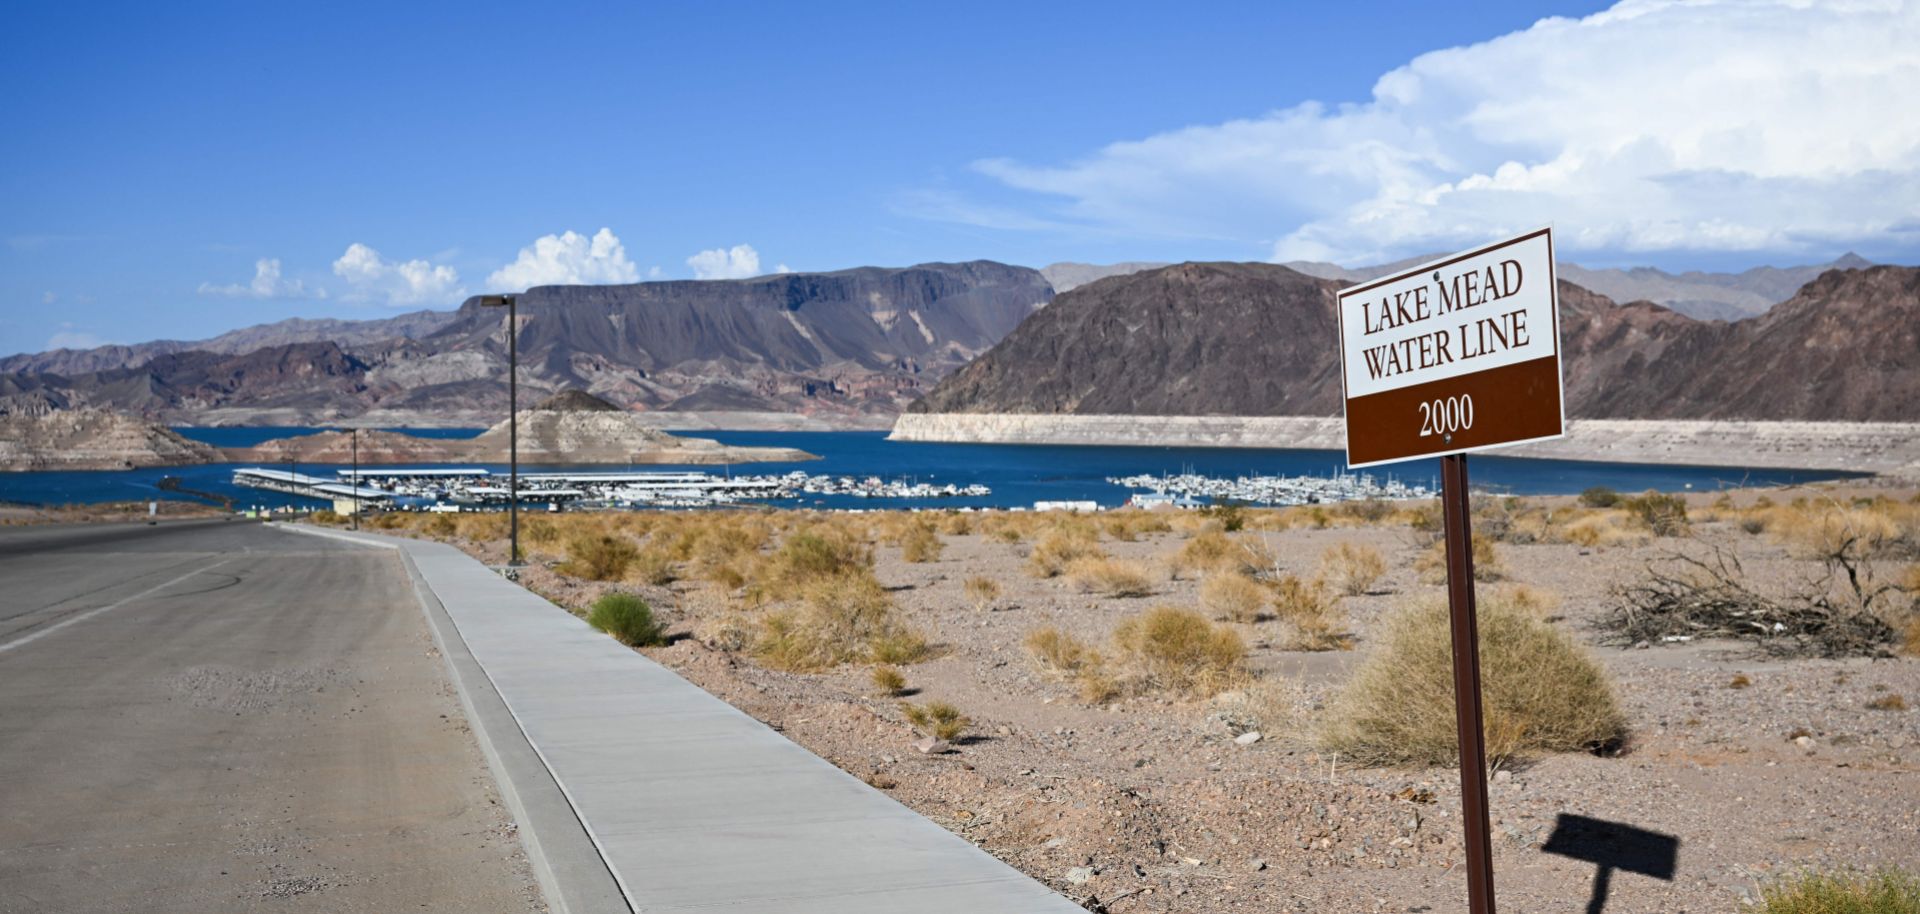 A photo taken on June 28, 2022, at Lake Mead along the Colorado River in Boulder City, Nevada, shows the lake's water line in 2000 in contrast to its current low water levels. 